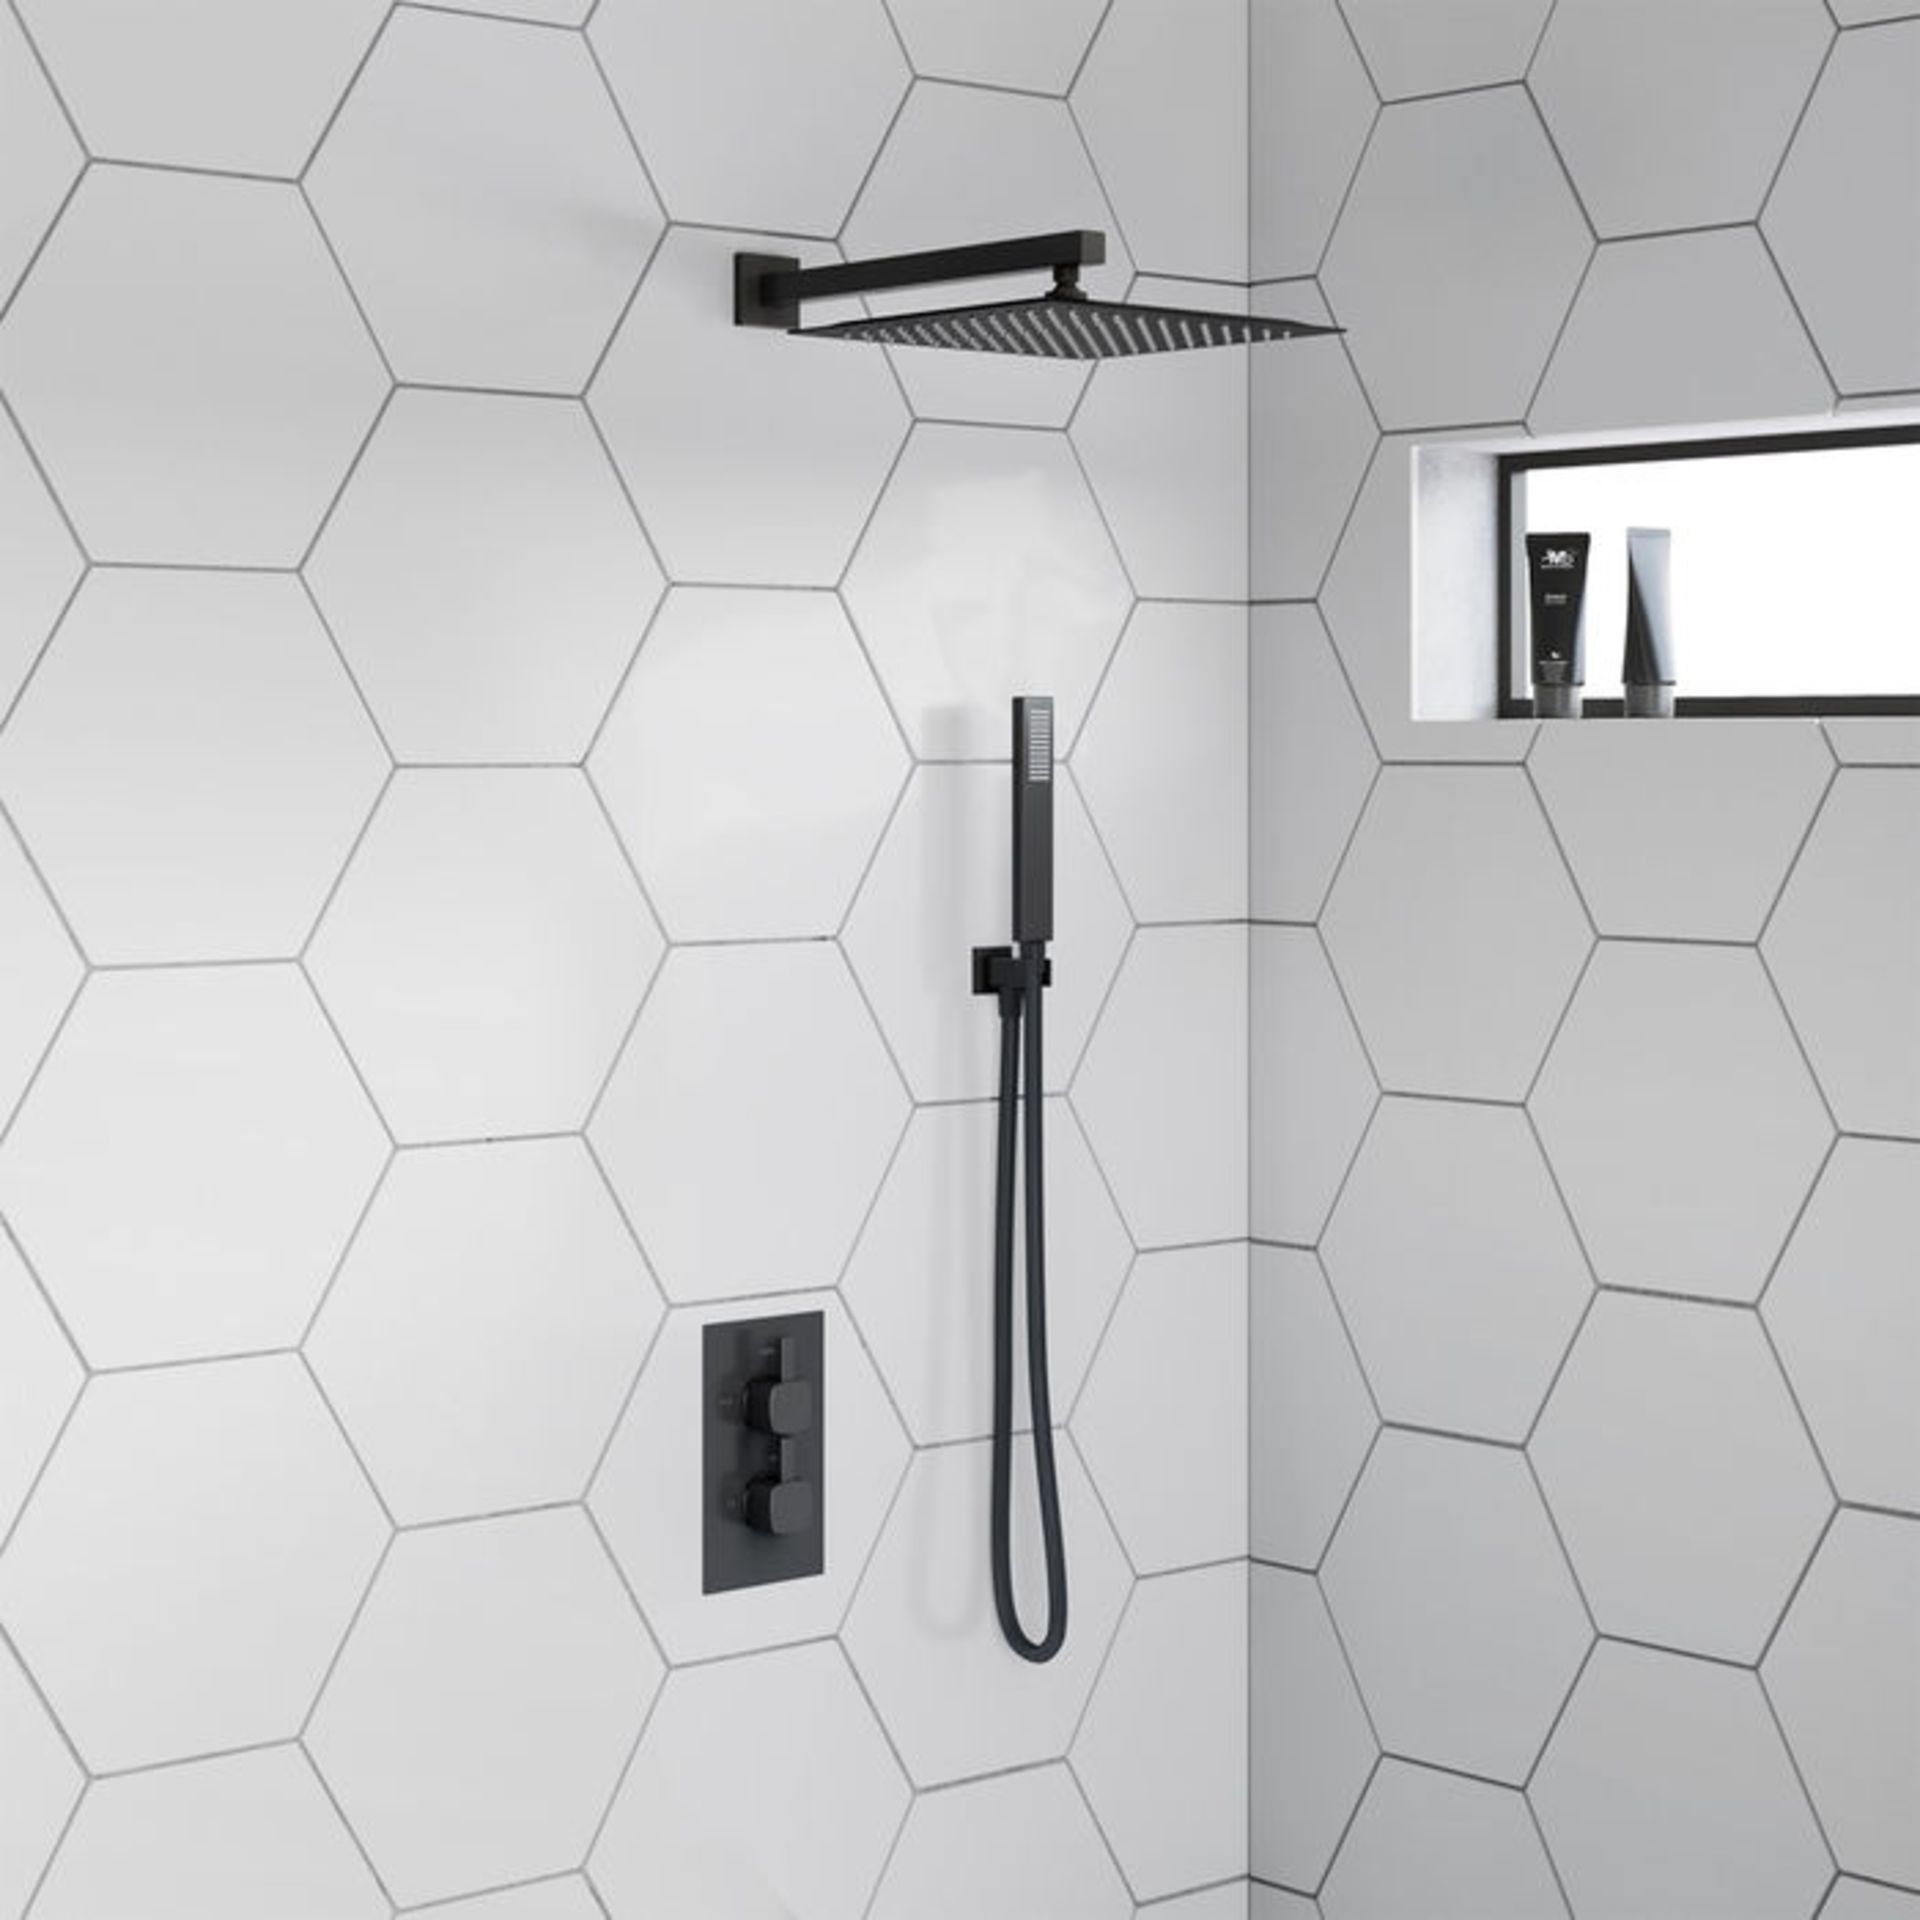 (YC67) Matte Black Square Concealed Thermostatic Mixer Shower Kit & Large Head. RRP £419.99. - Image 2 of 3